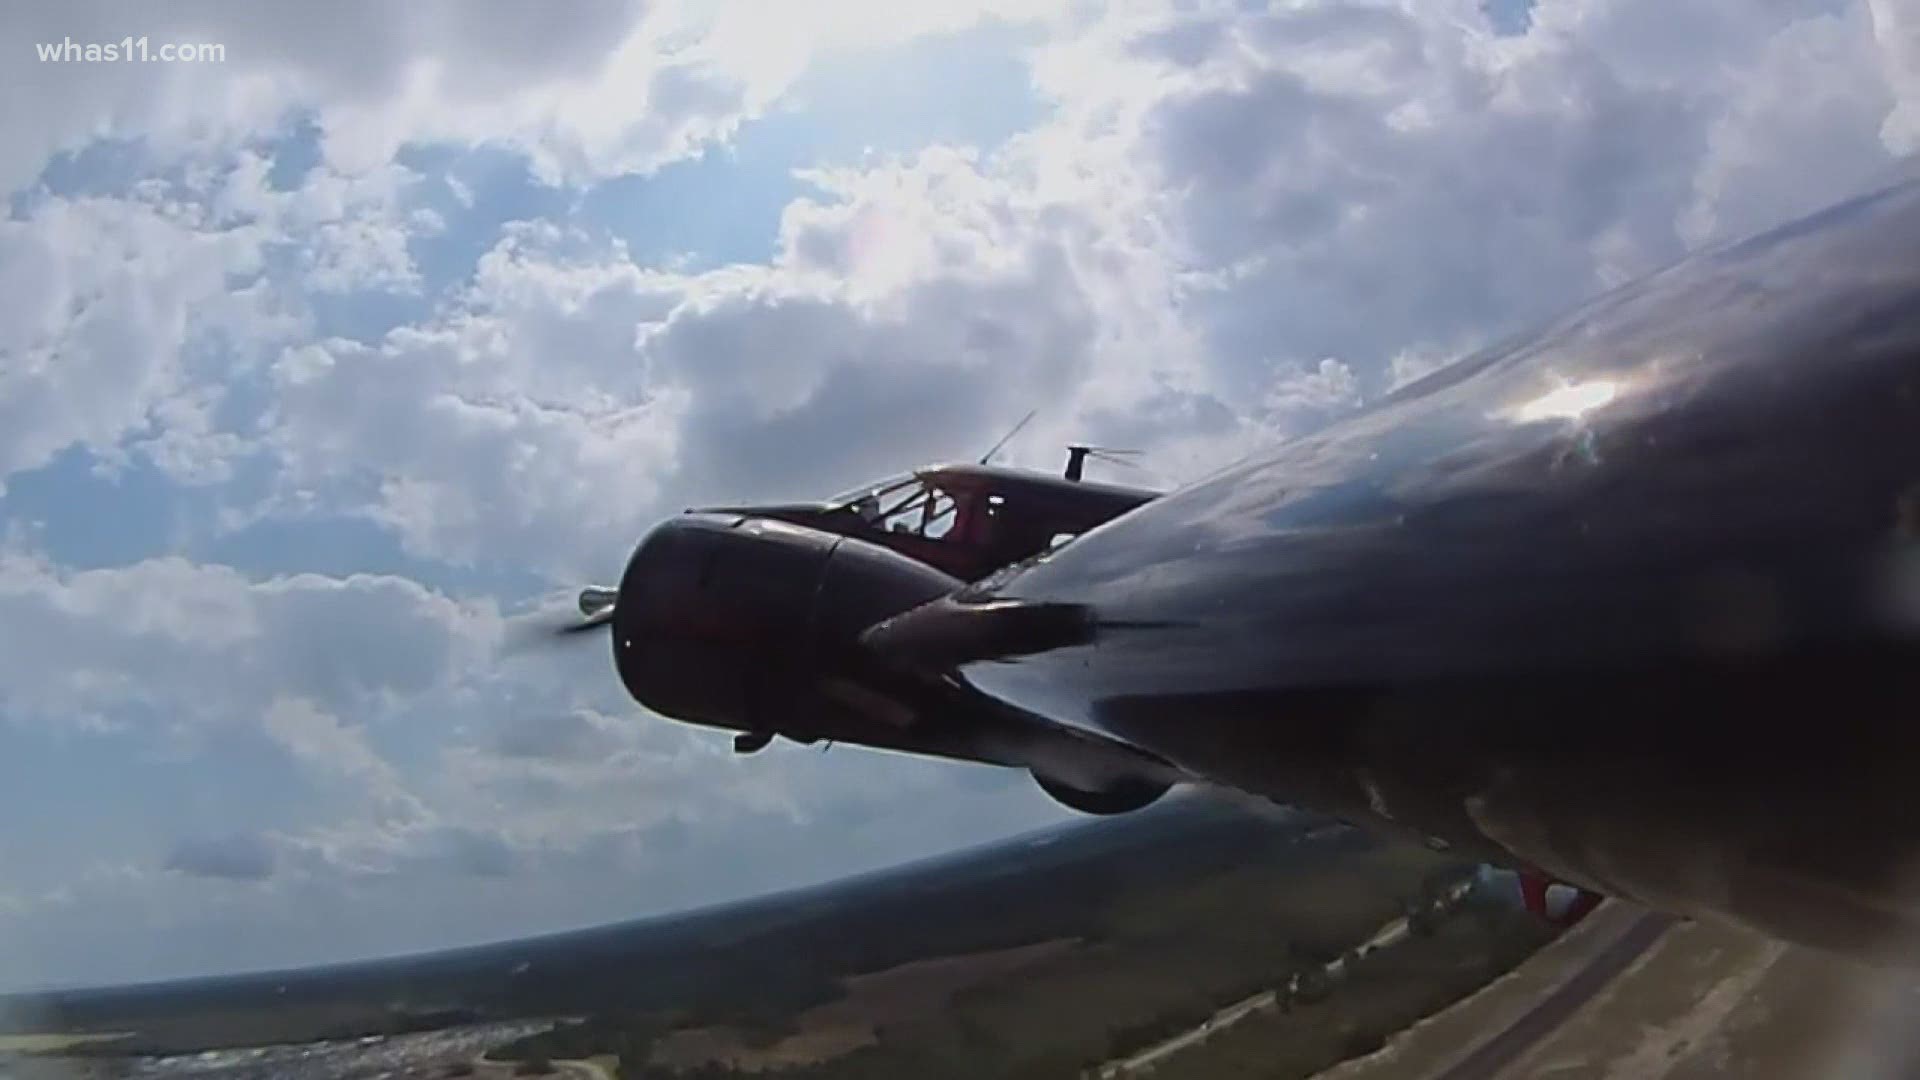 Pilot Matt Younkin will fly over Louisville in an aircraft unlike anything else you'll see at Thunder.